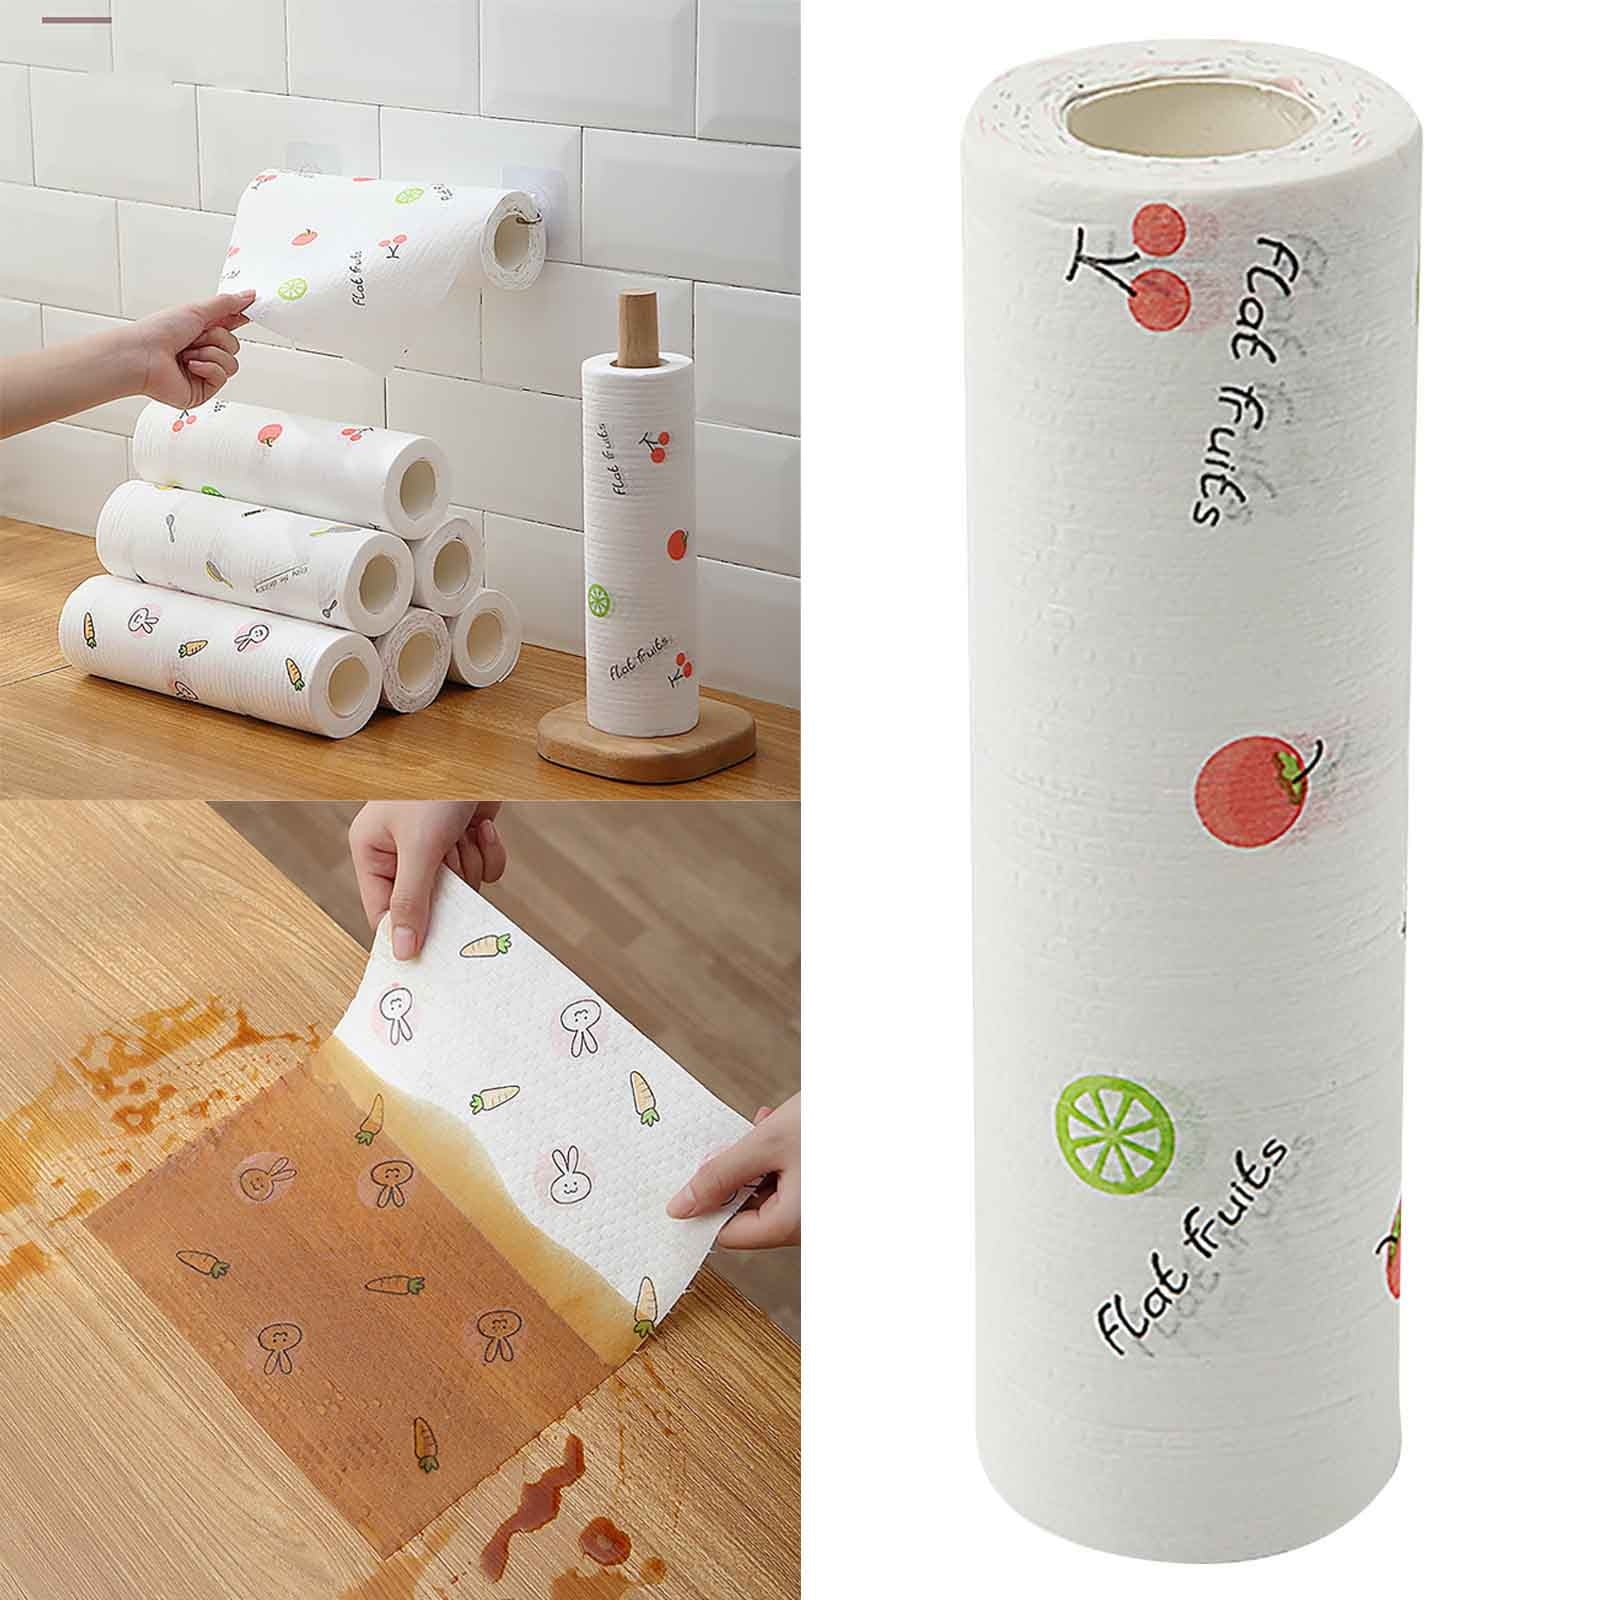 Disposable Dish Towels Kitchen Supplies Lazy Rags Scouring Pads Cleaning  Rags